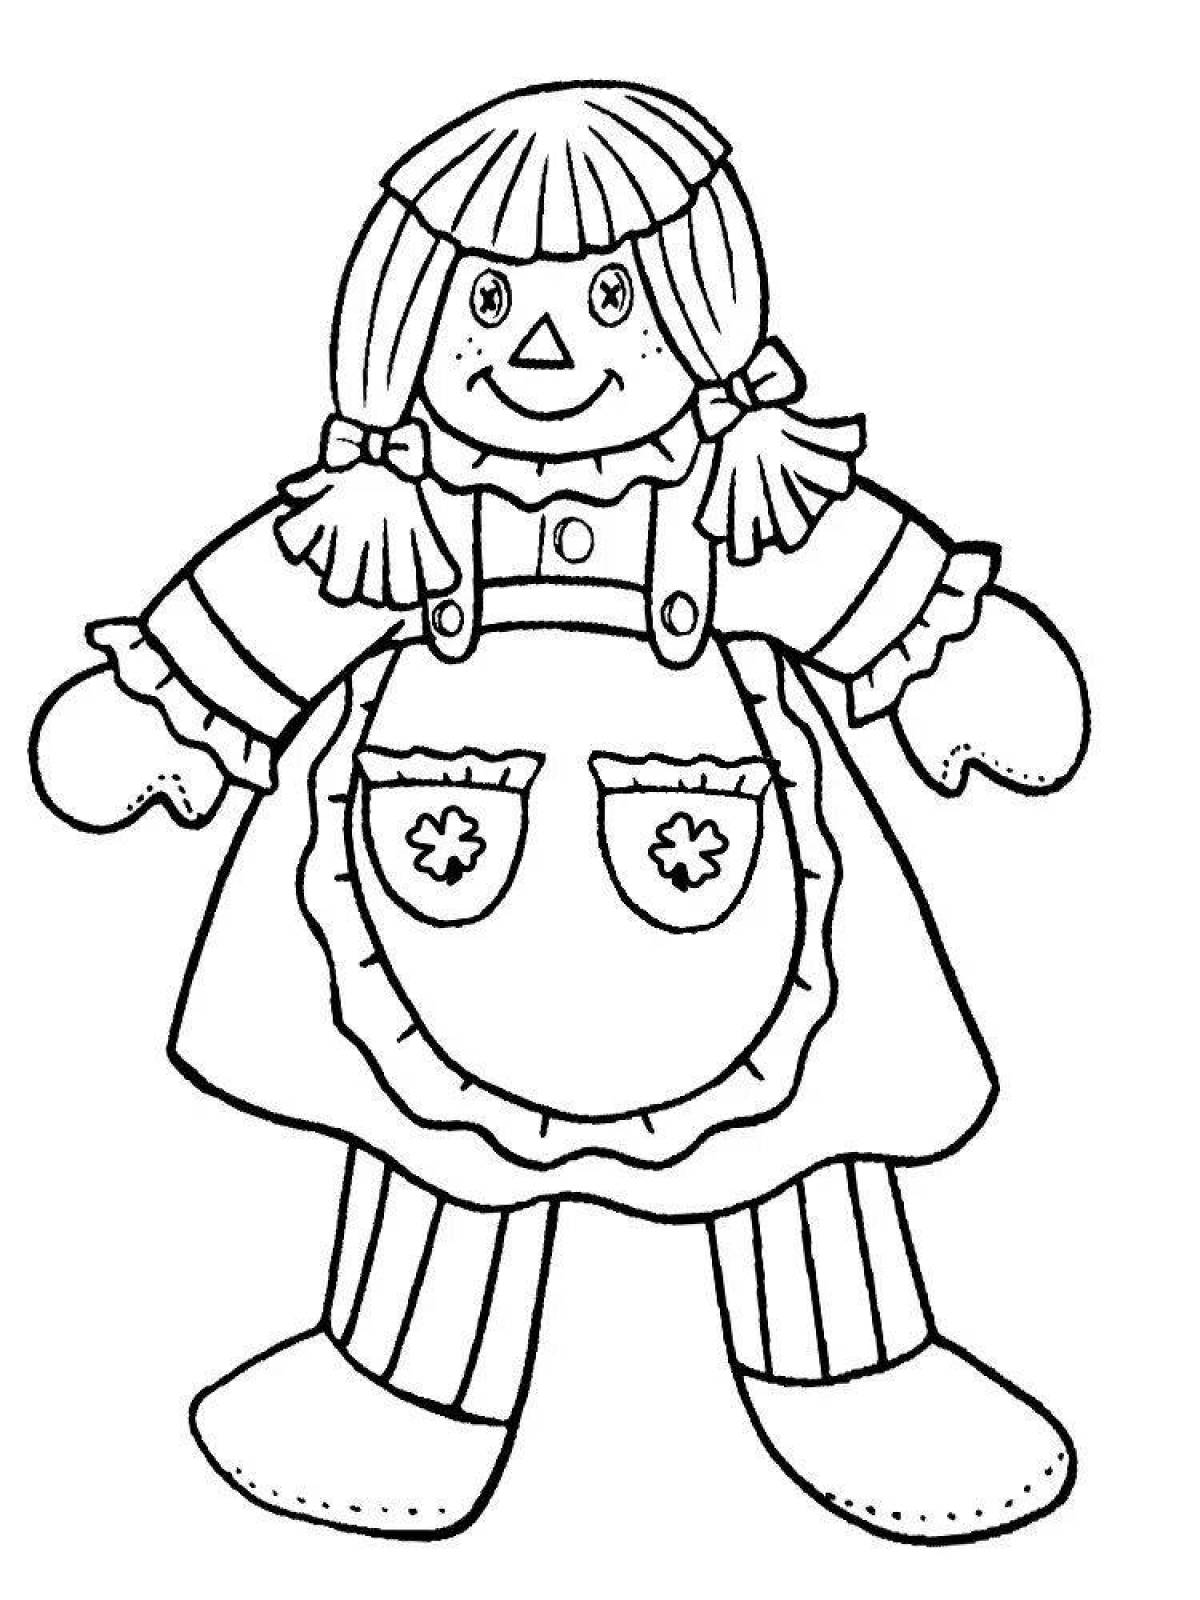 Exciting coloring book for drawing dolls